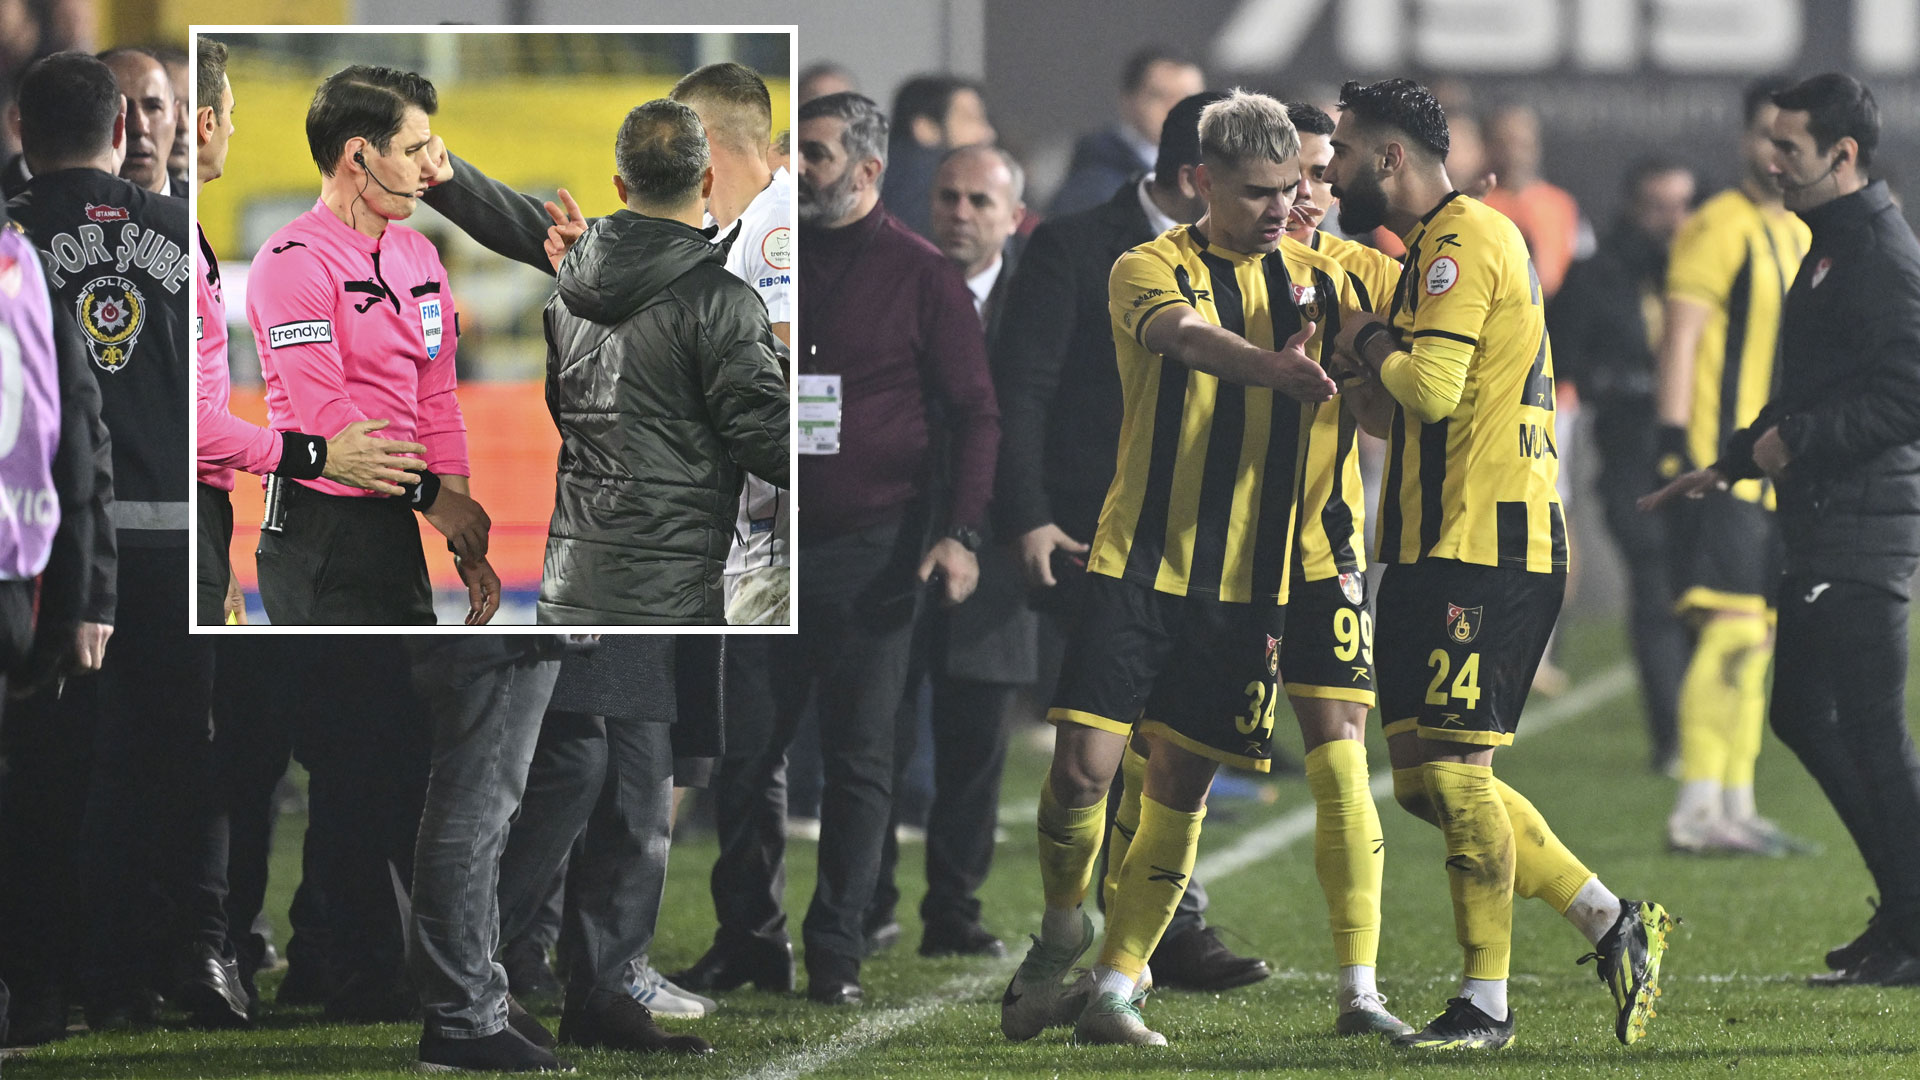 Fresh refereeing chaos in Turkey as president pulls team off pitch in protest a week after club boss punched official